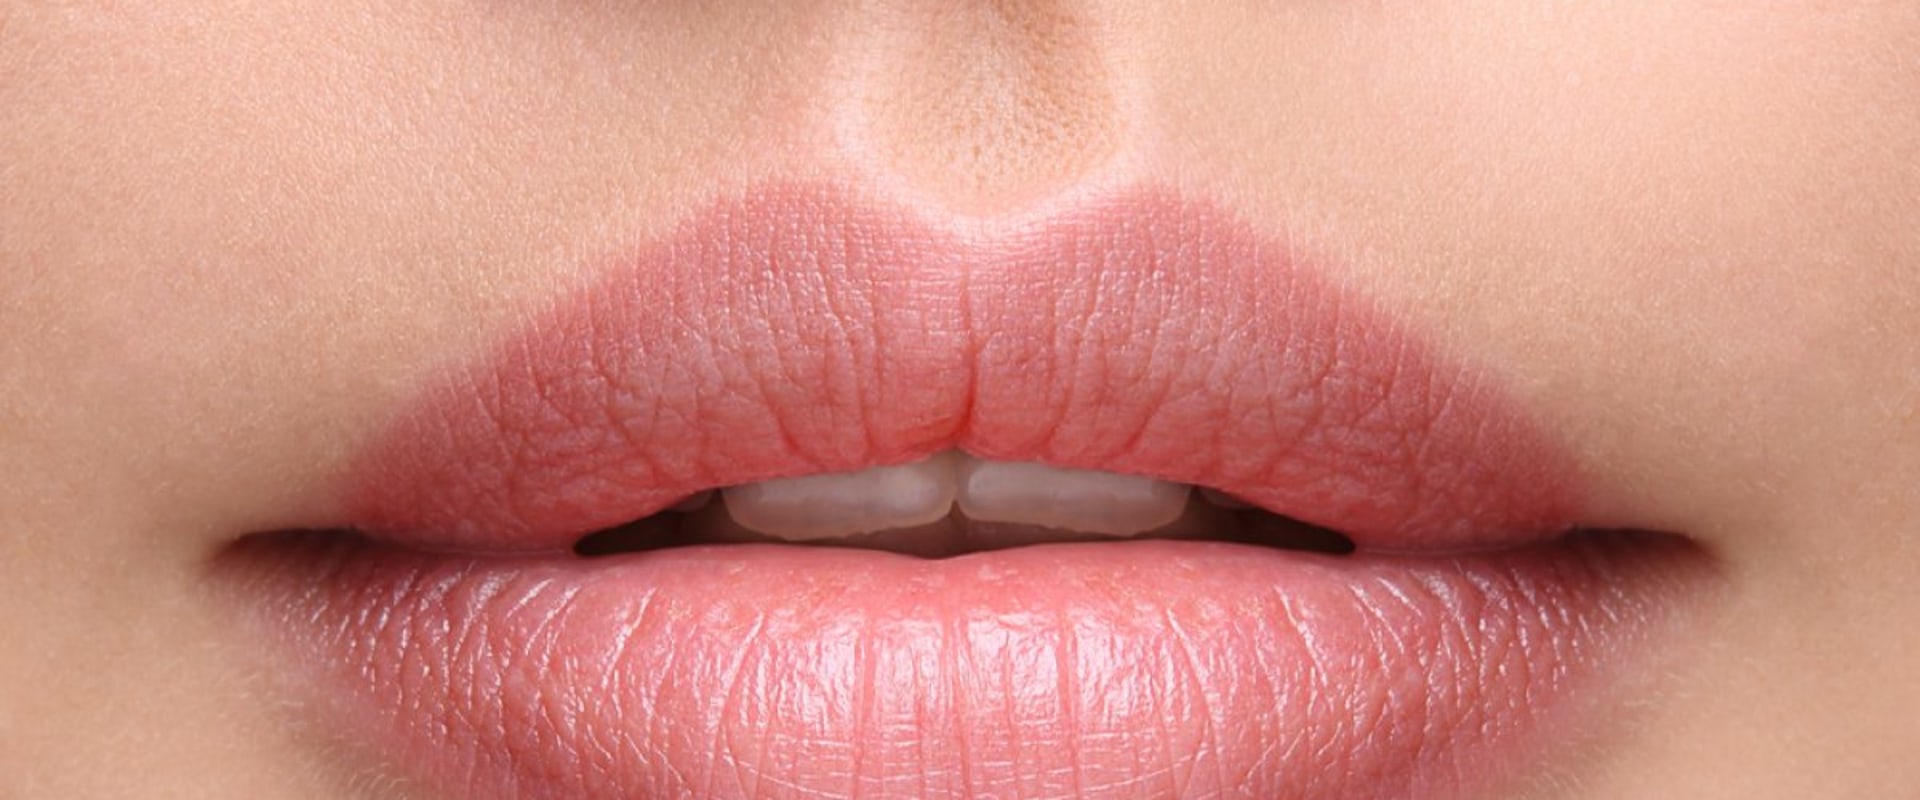 Which type of juvederm lasts the longest?